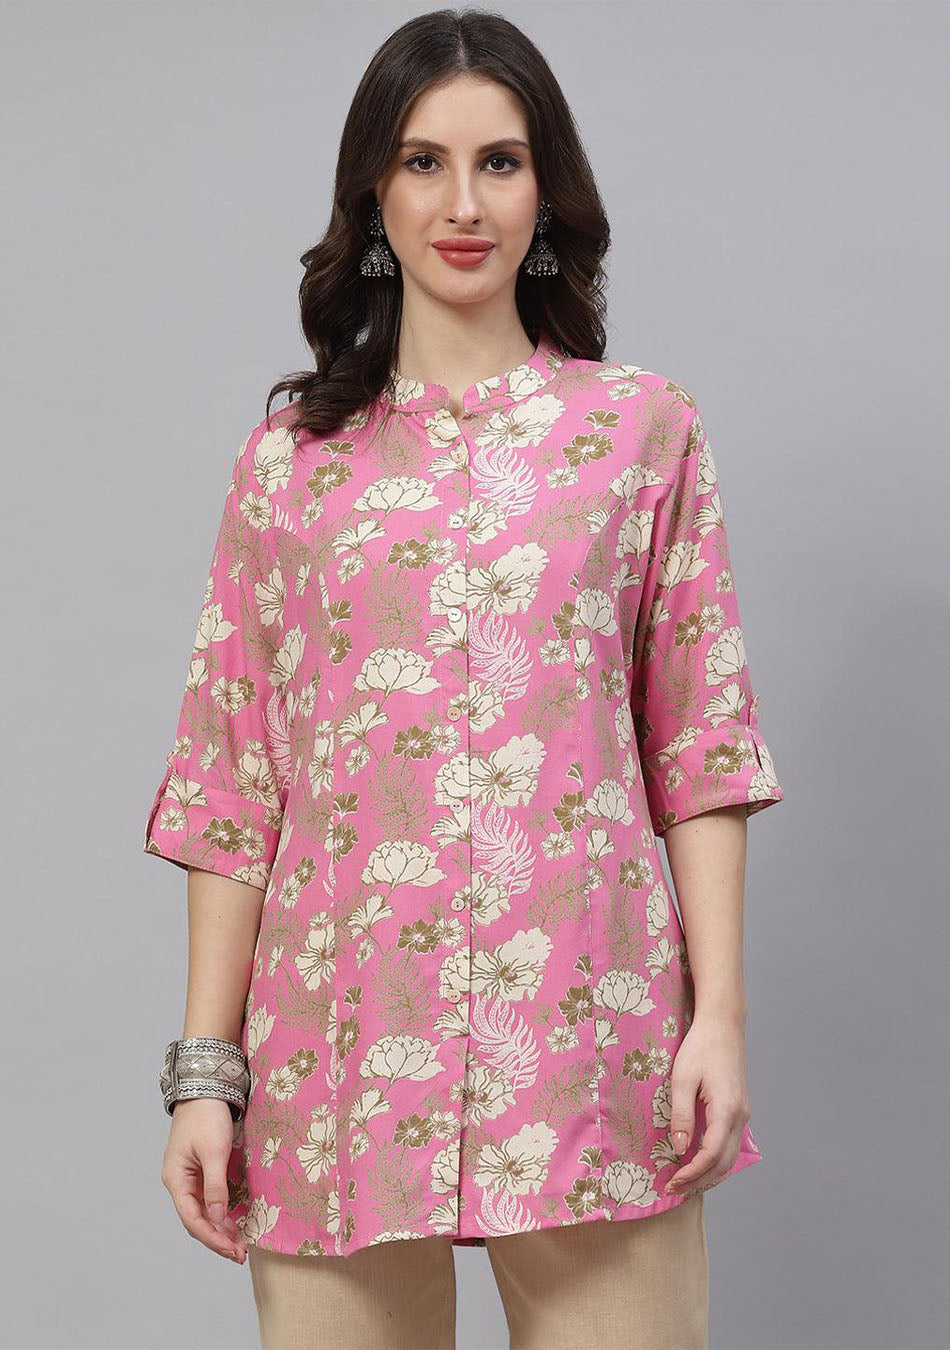 Light Pink Floral Rayon A-line Top